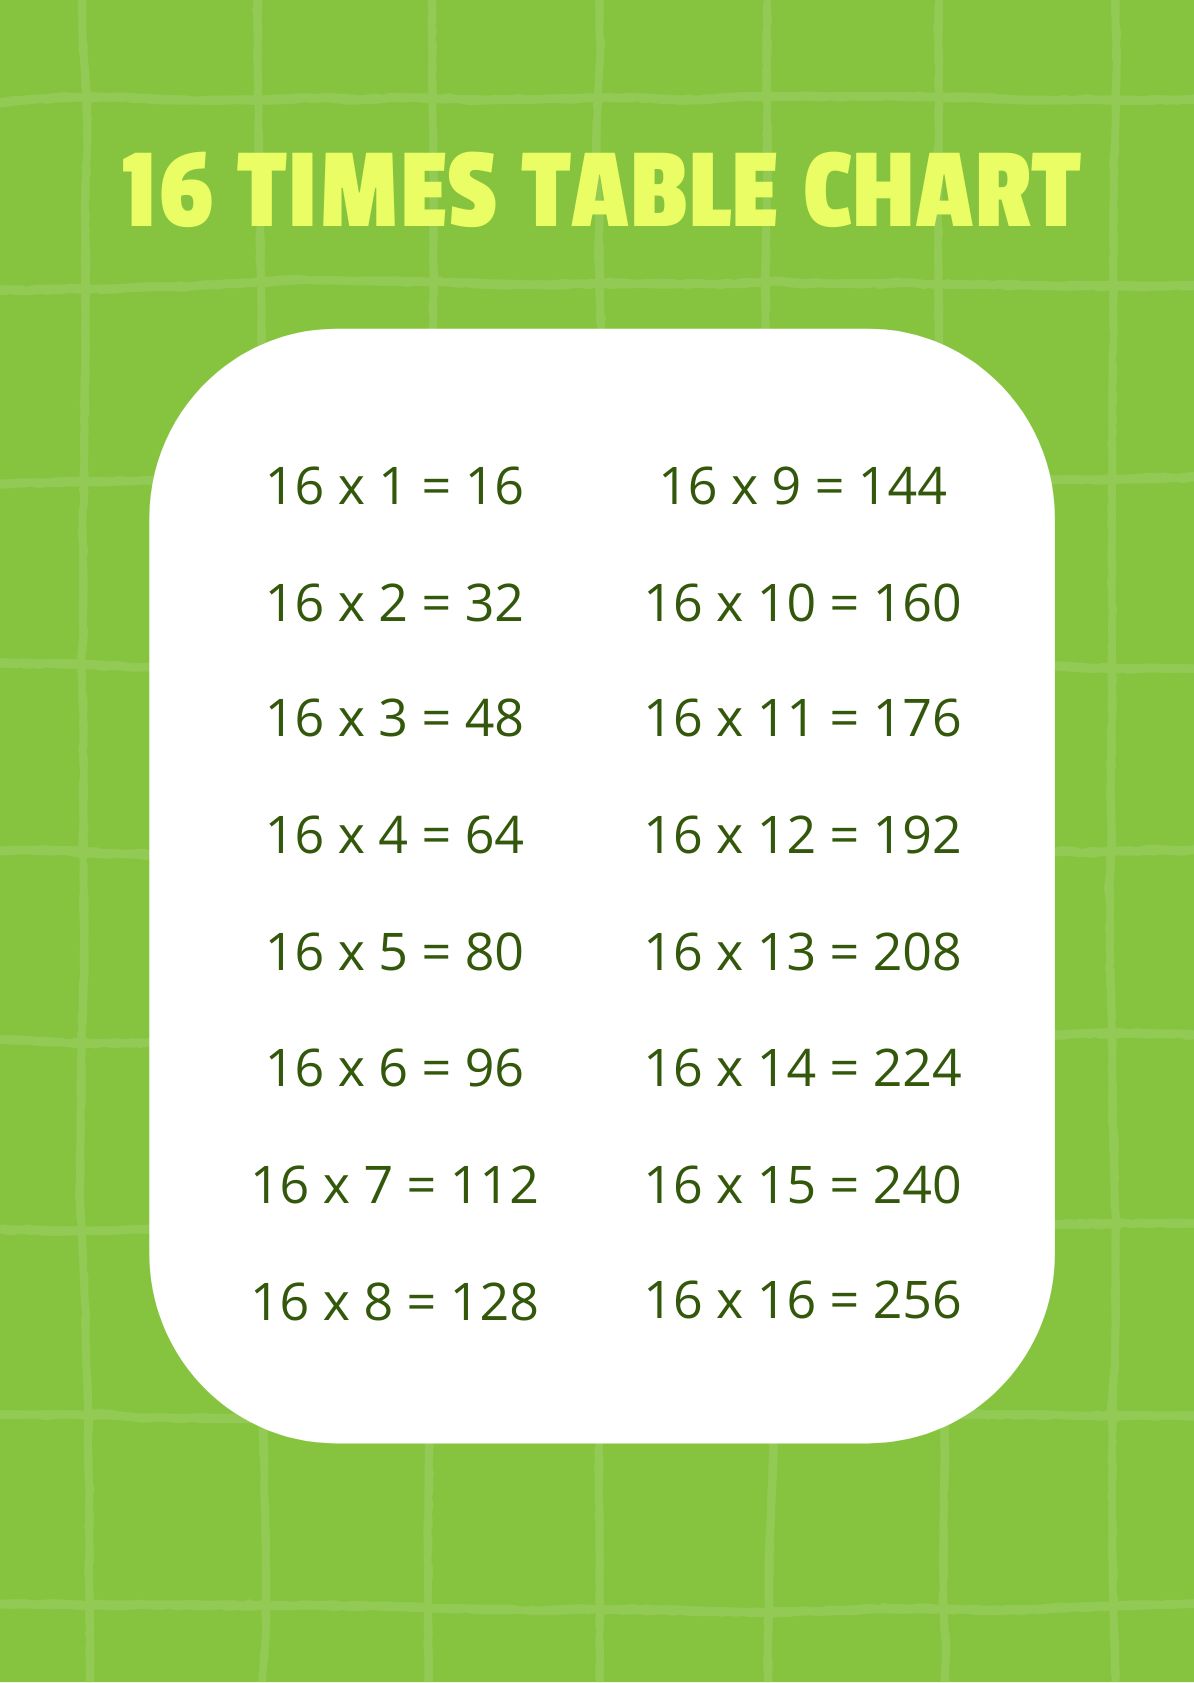 16 Times Table Chart in PDF